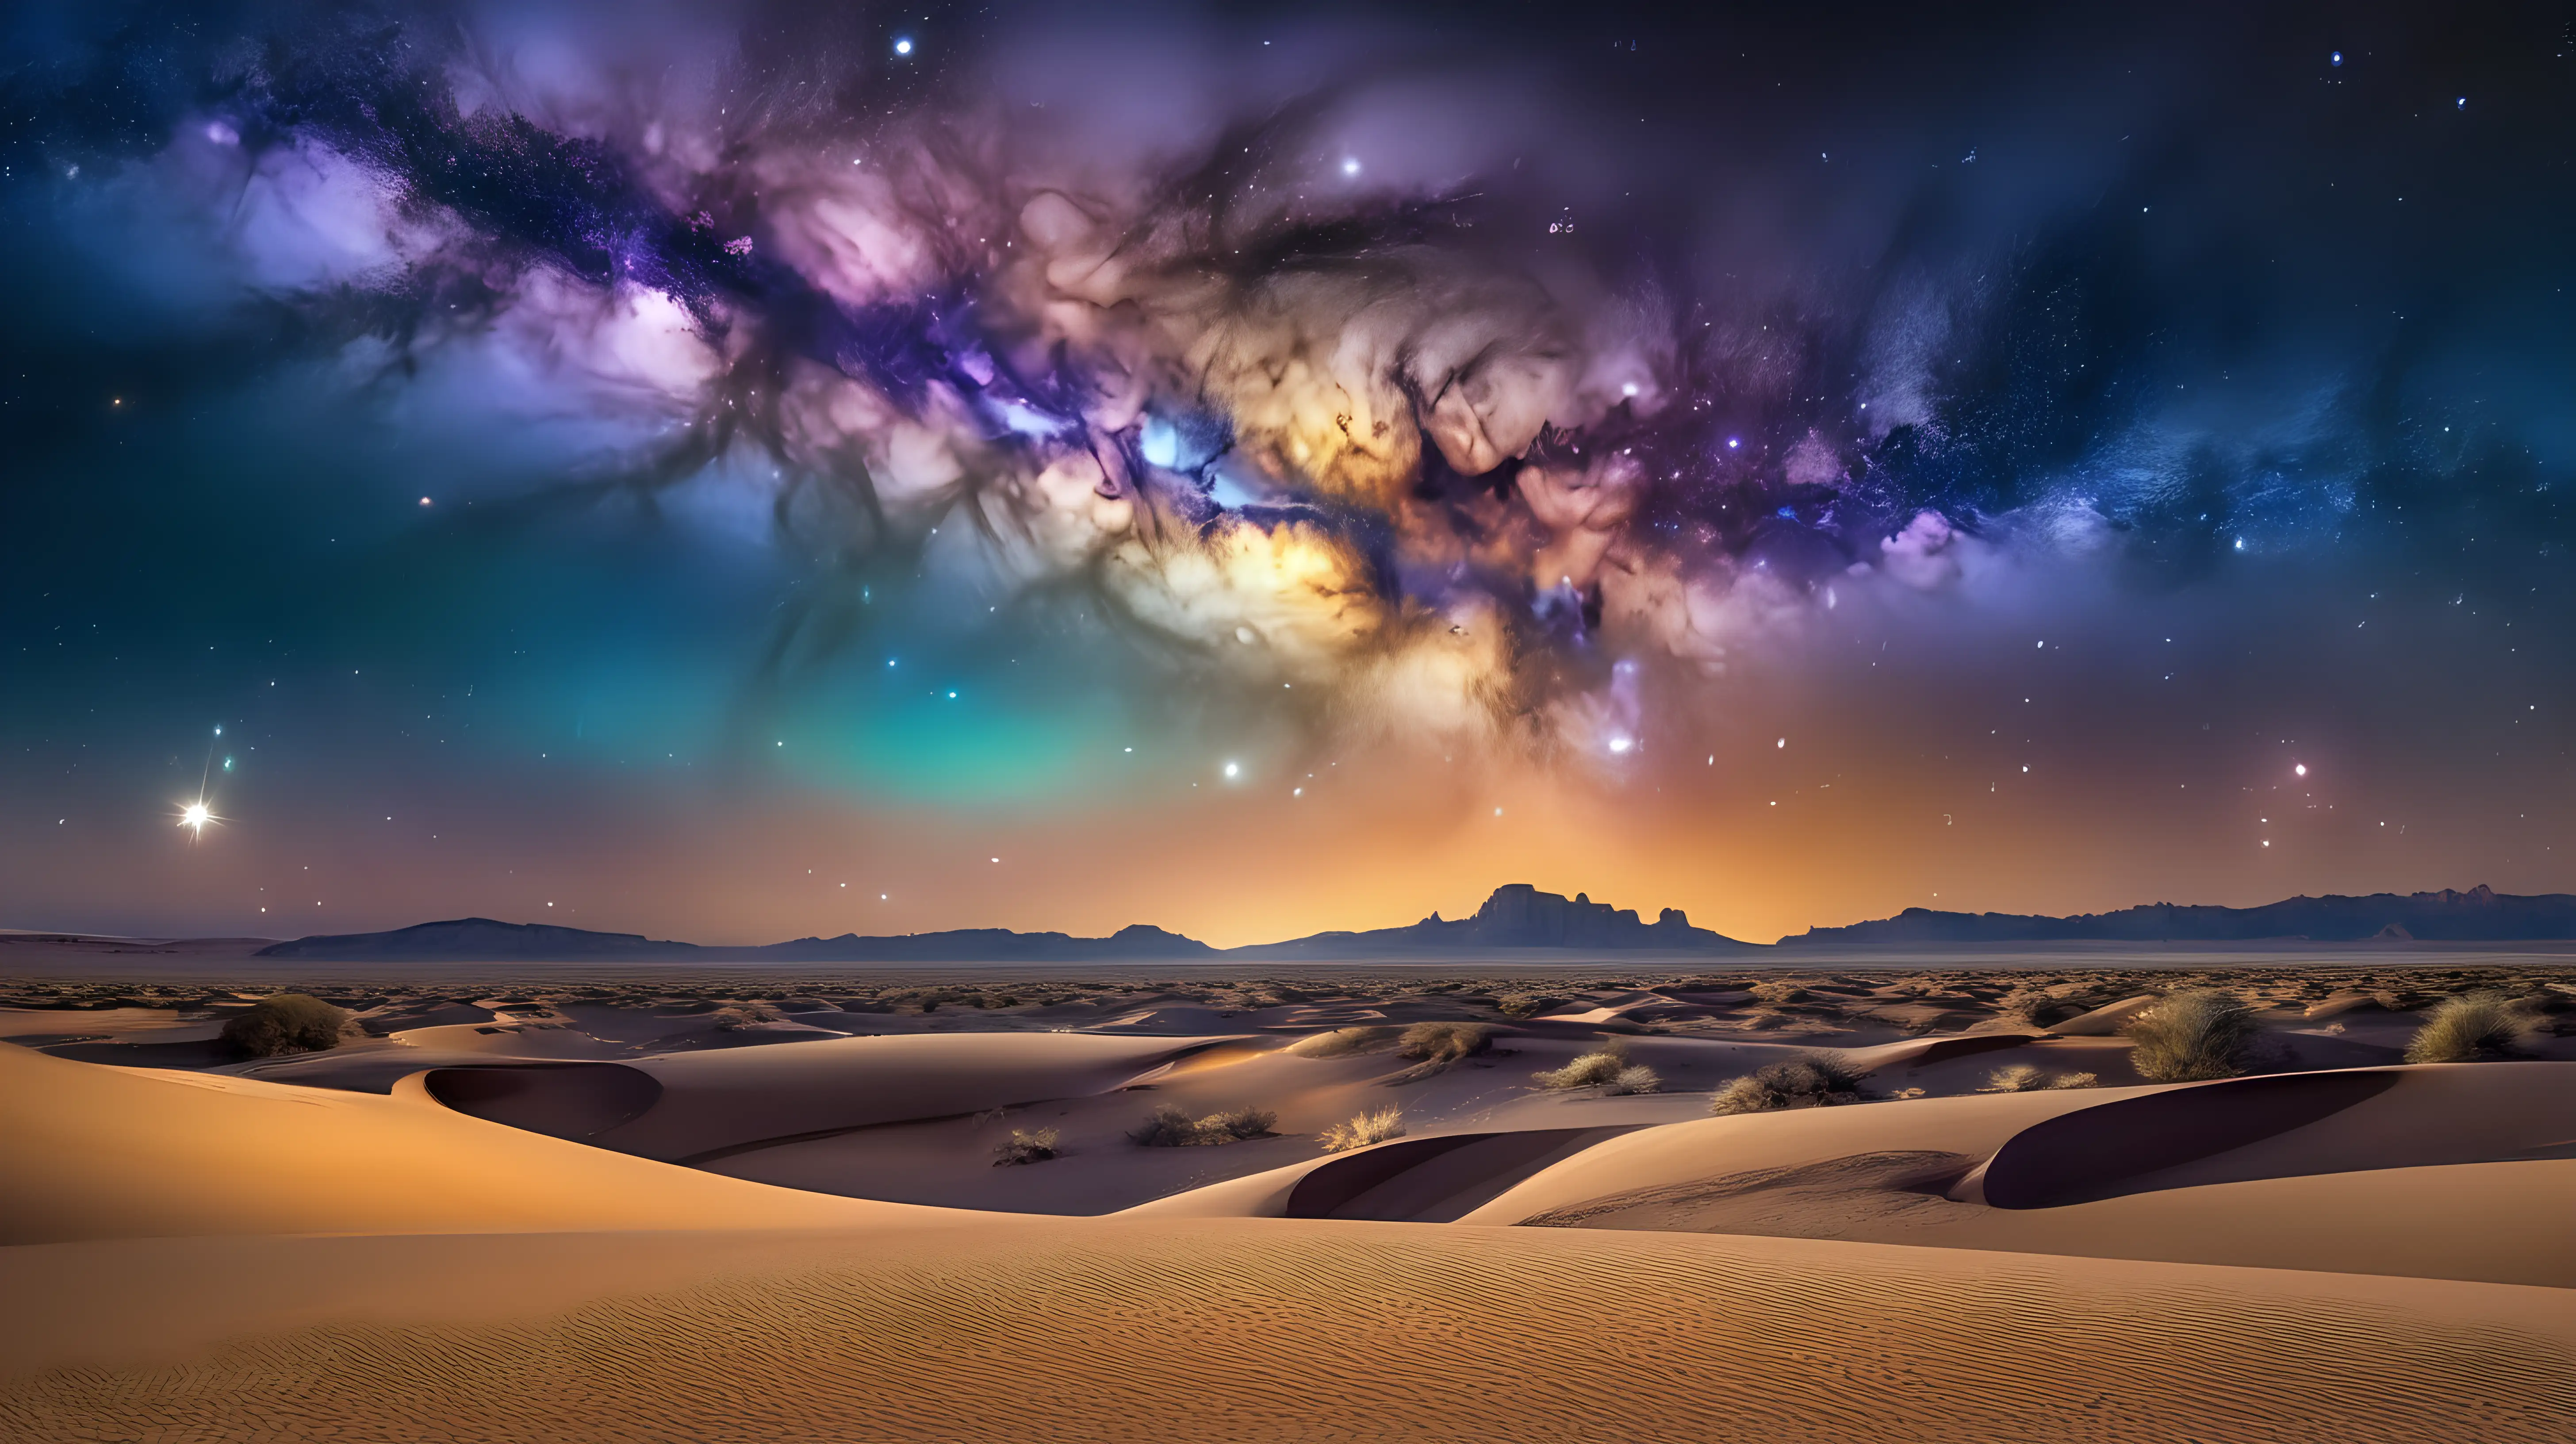 A mirage of a celestial phenomenon, where the desert sky is filled with swirling galaxies and shimmering stars, creating a psychedelic vision of the universe suspended above the sands.